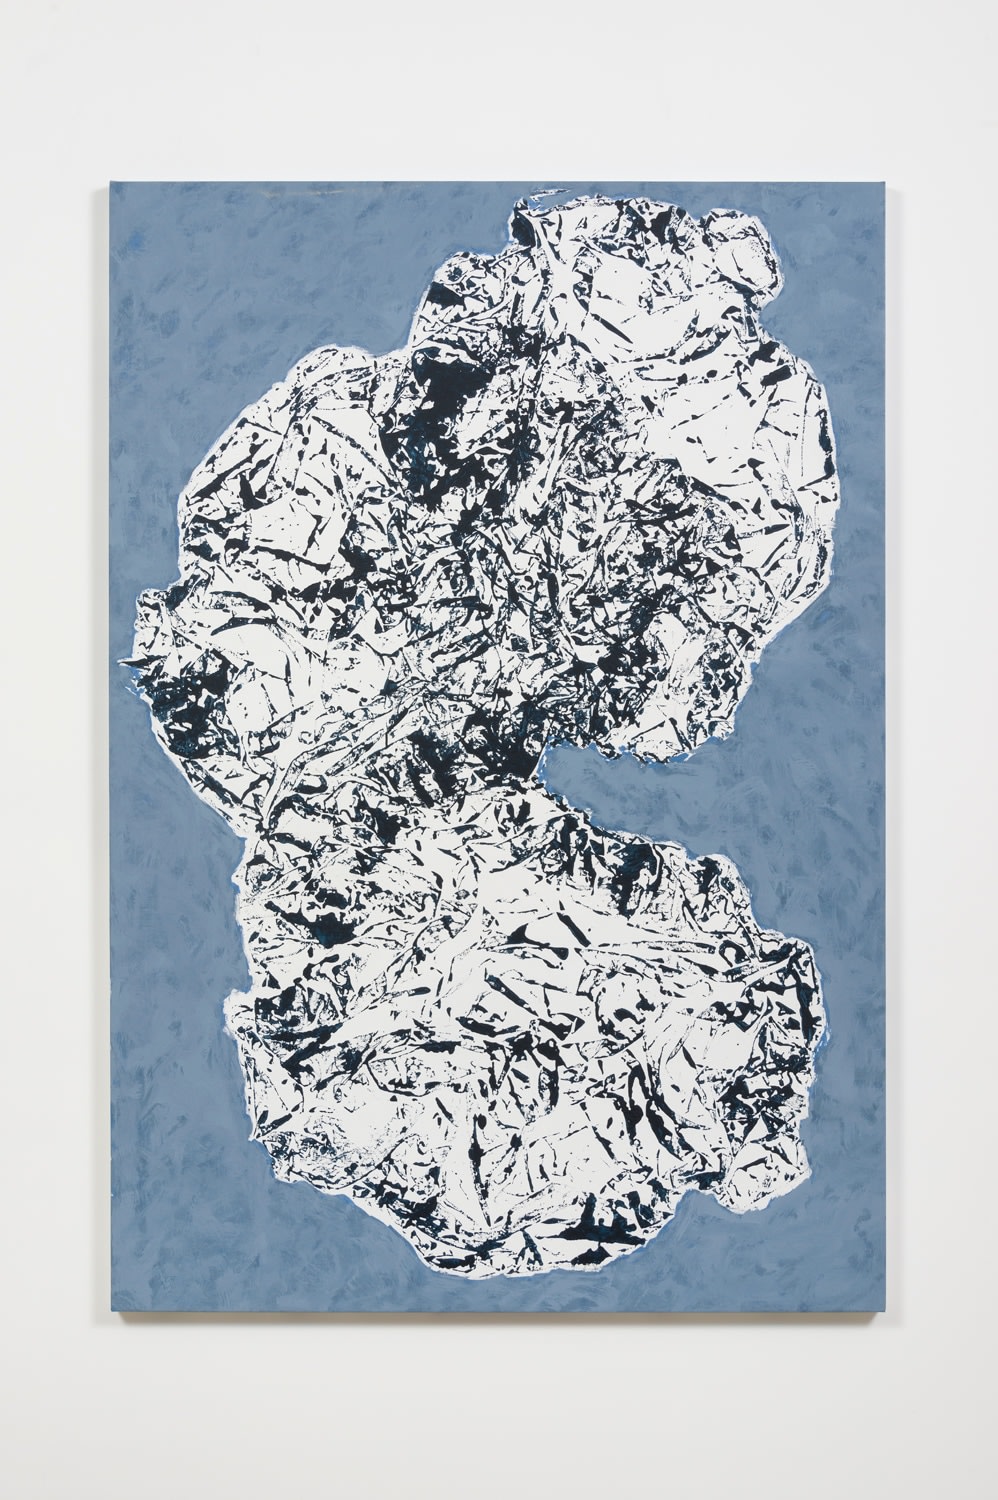 Florence Derive, White Cloud on Blue, 2015